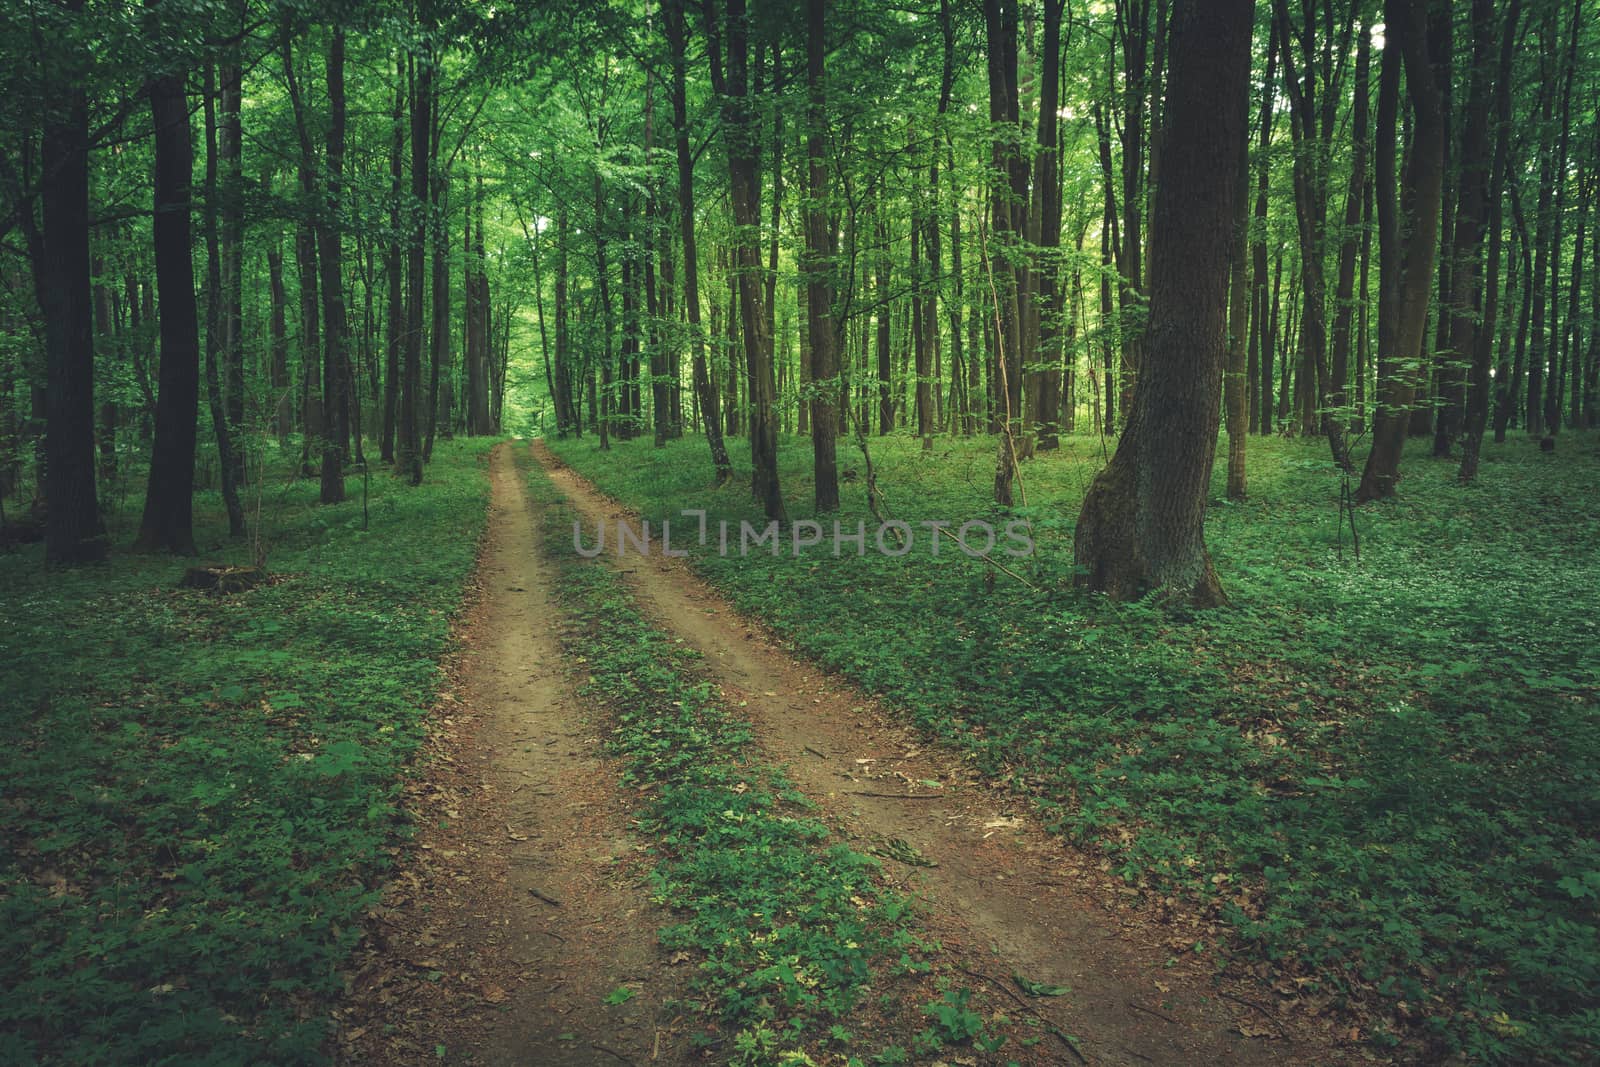 Ground road through green leafy forest, spring view